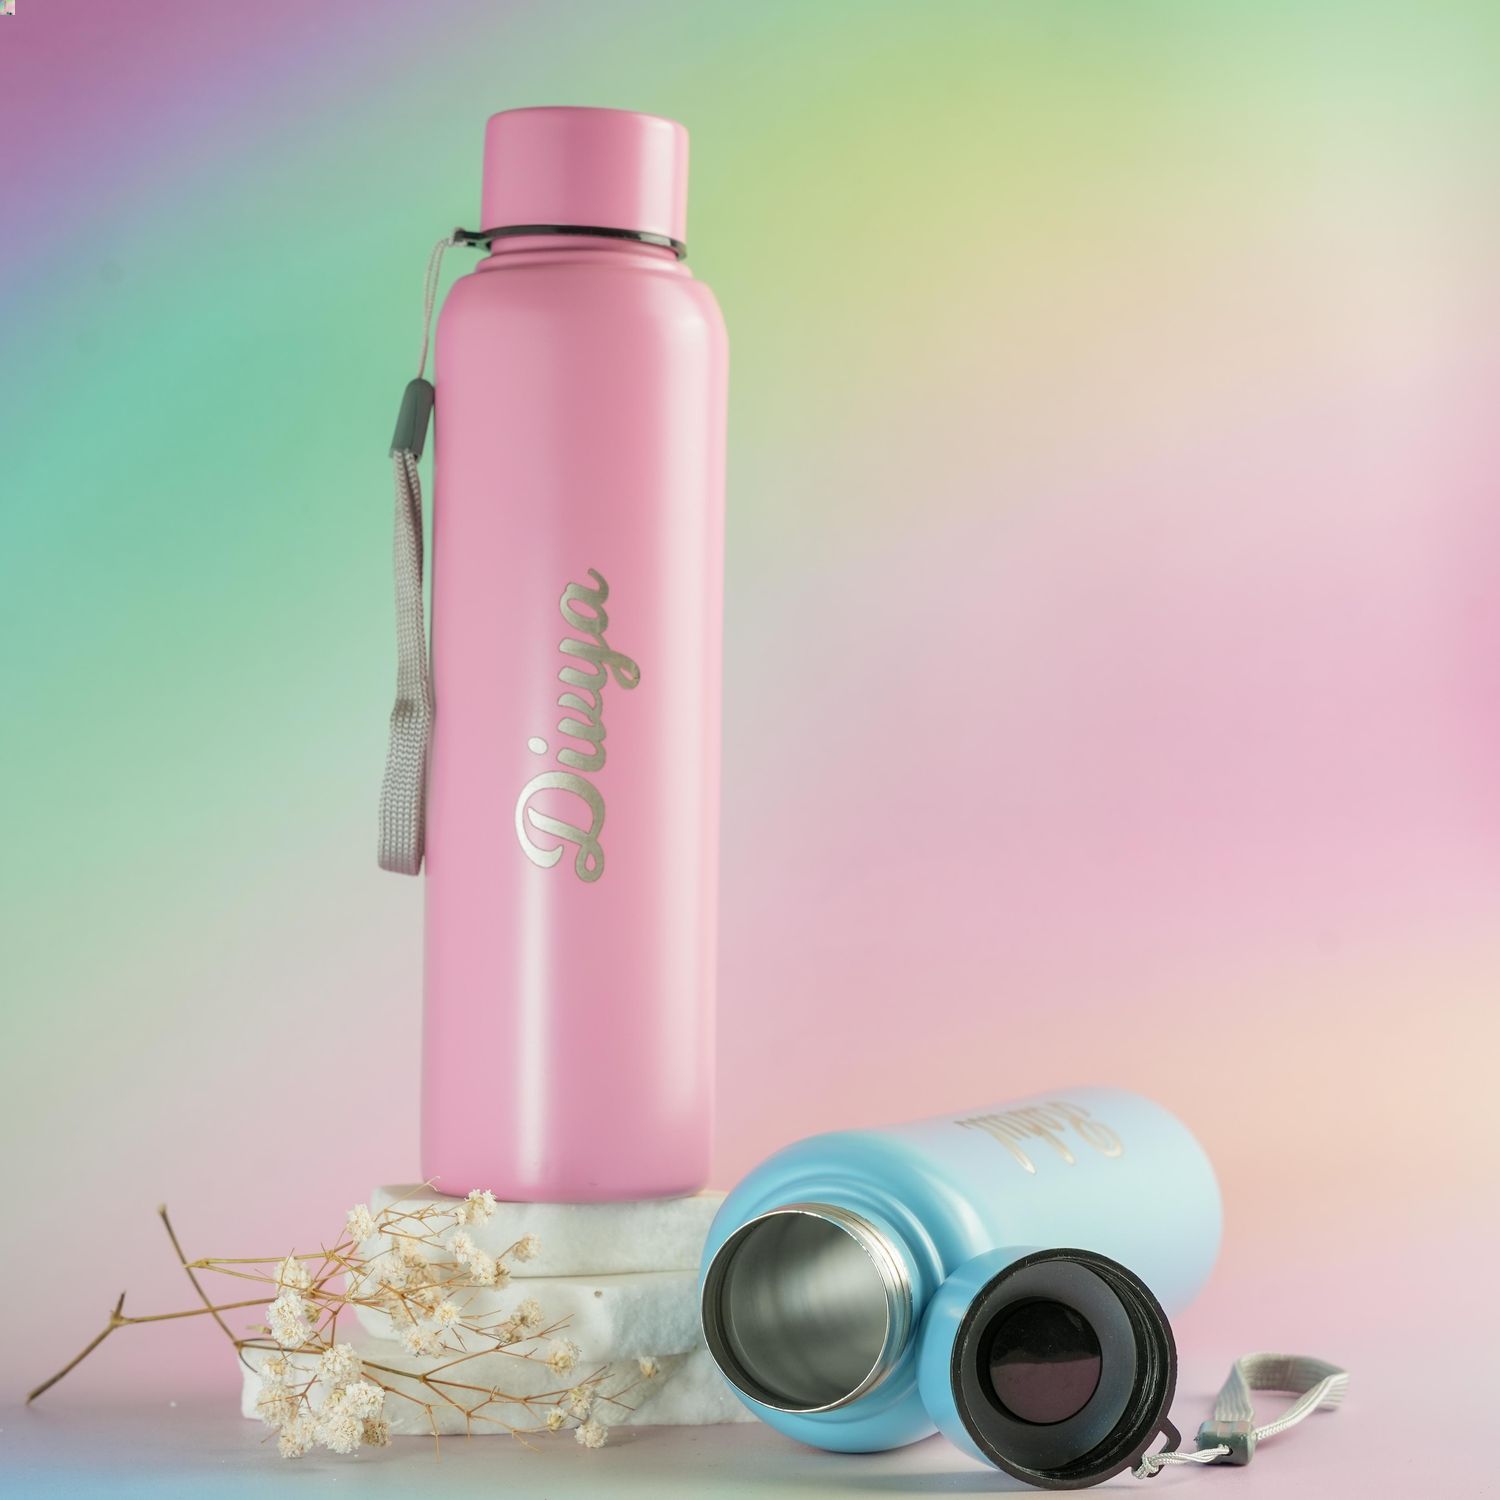 Custom Protein Shaker Bottle, Birthday Gifts, Gym Gifts, Stainless